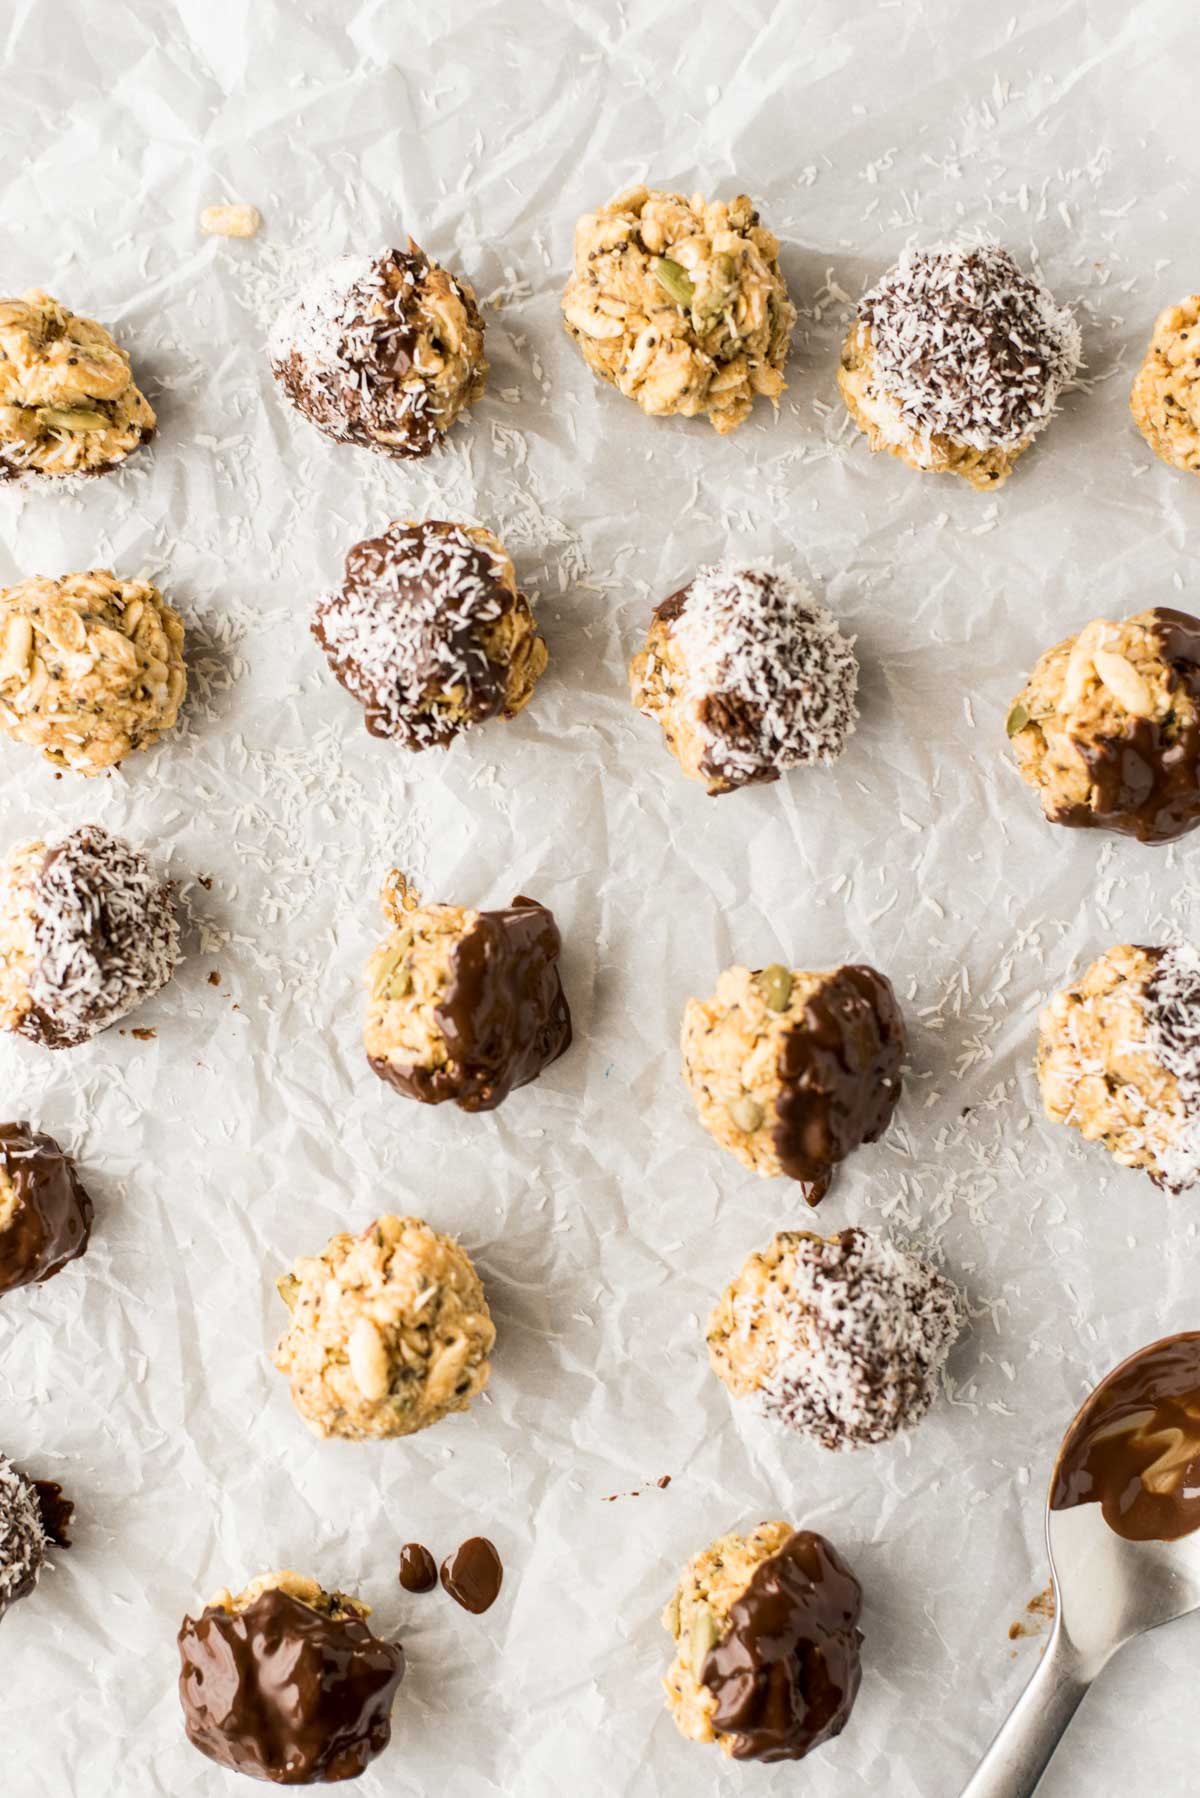 Healthy and homemade energy bites made in 10 minutes. This is the peanut butter chocolate treat you've been looking for. 